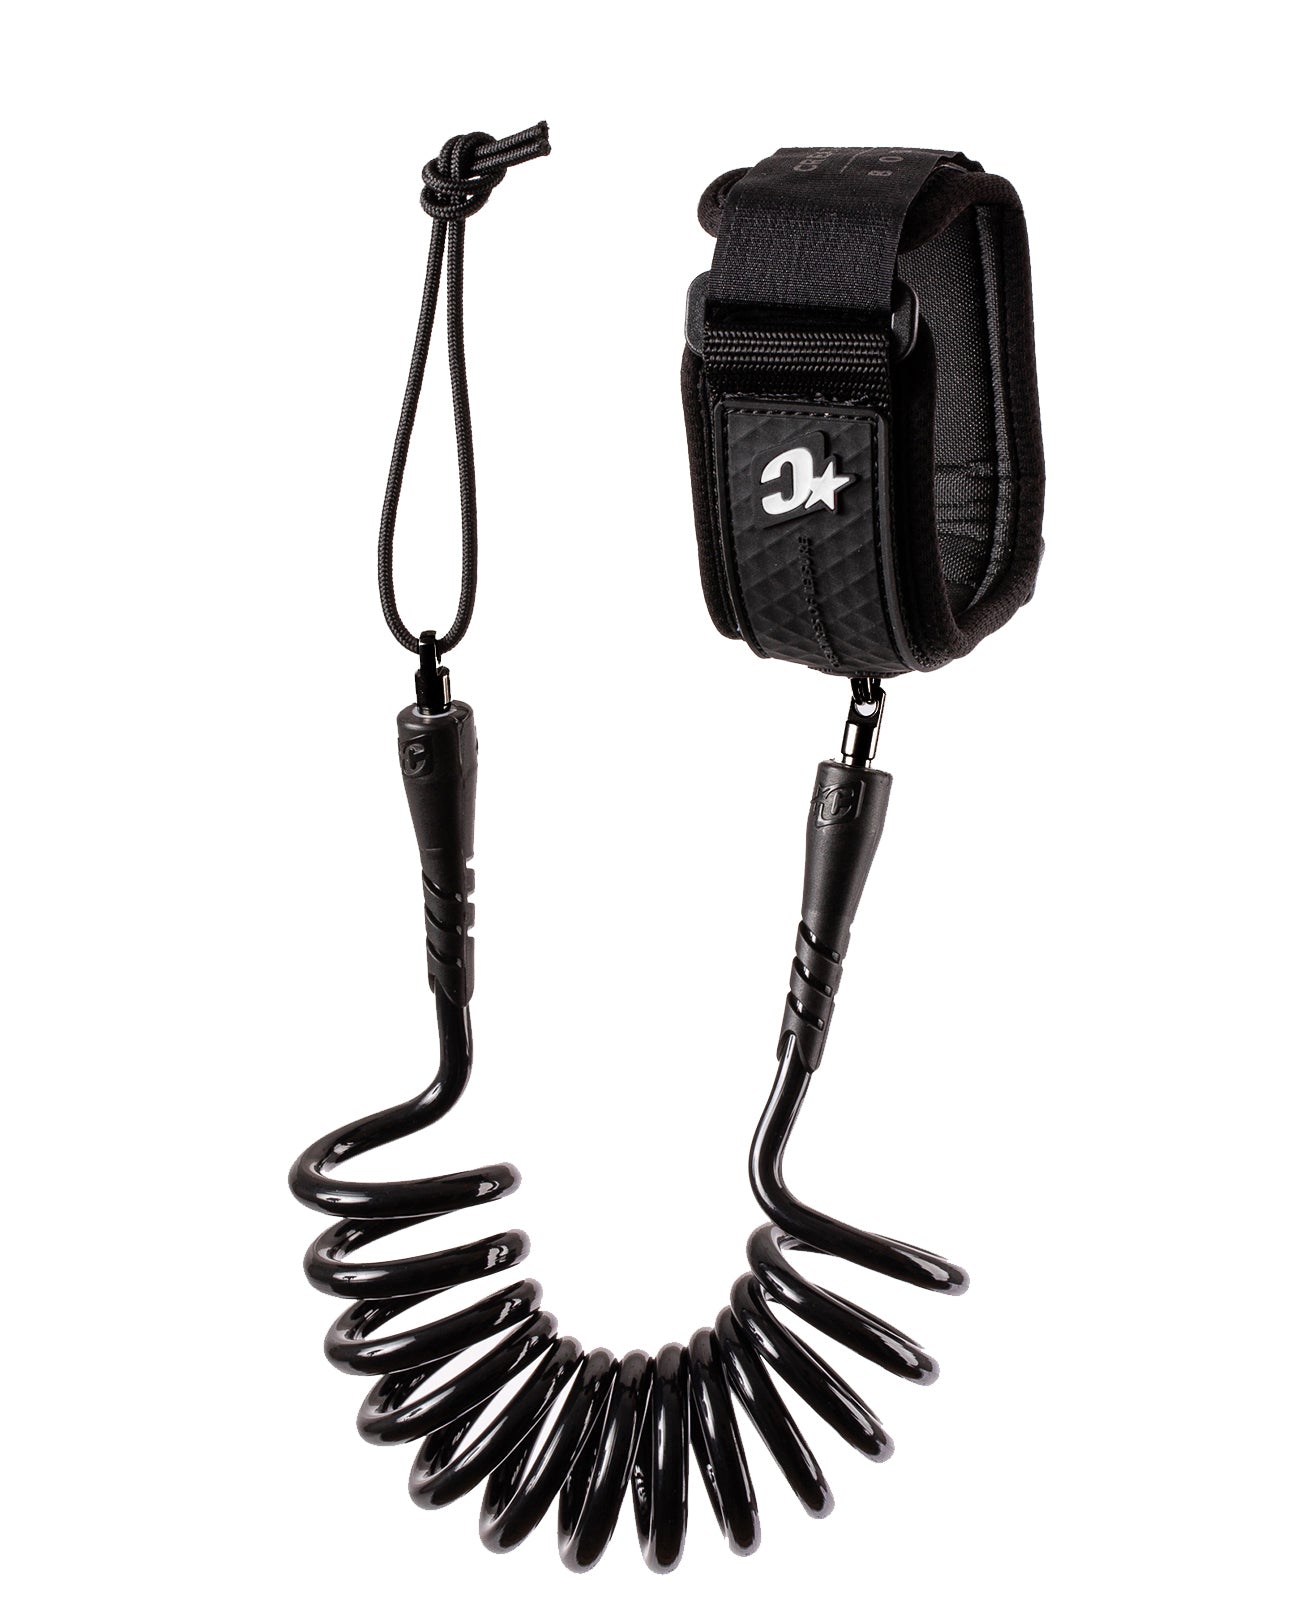 Creatures Reliance Reef Bicep L Leash